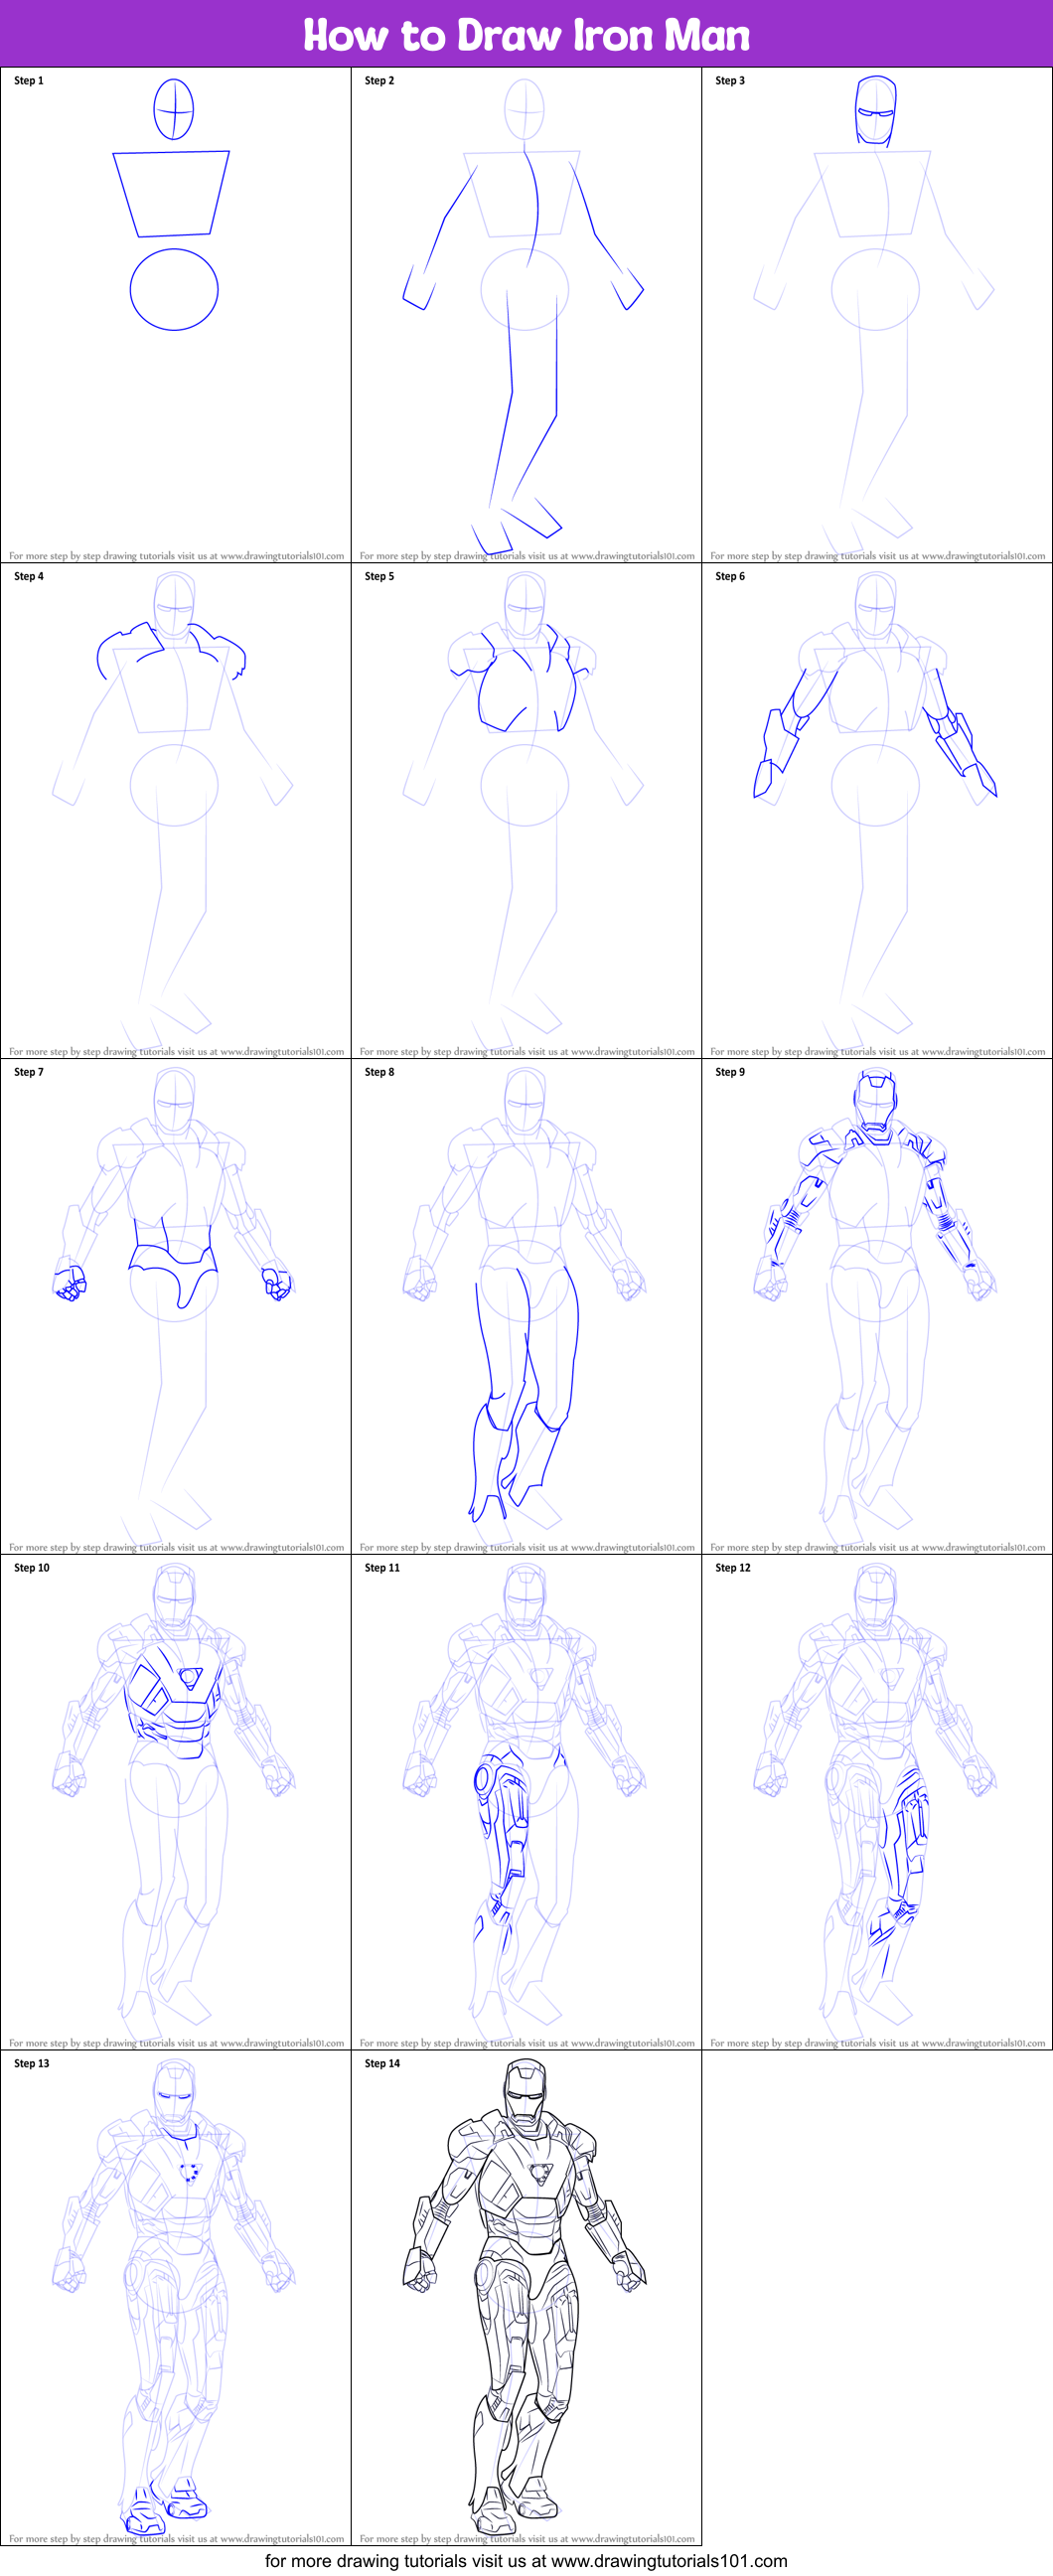 How to Draw Iron Man printable step by step drawing sheet